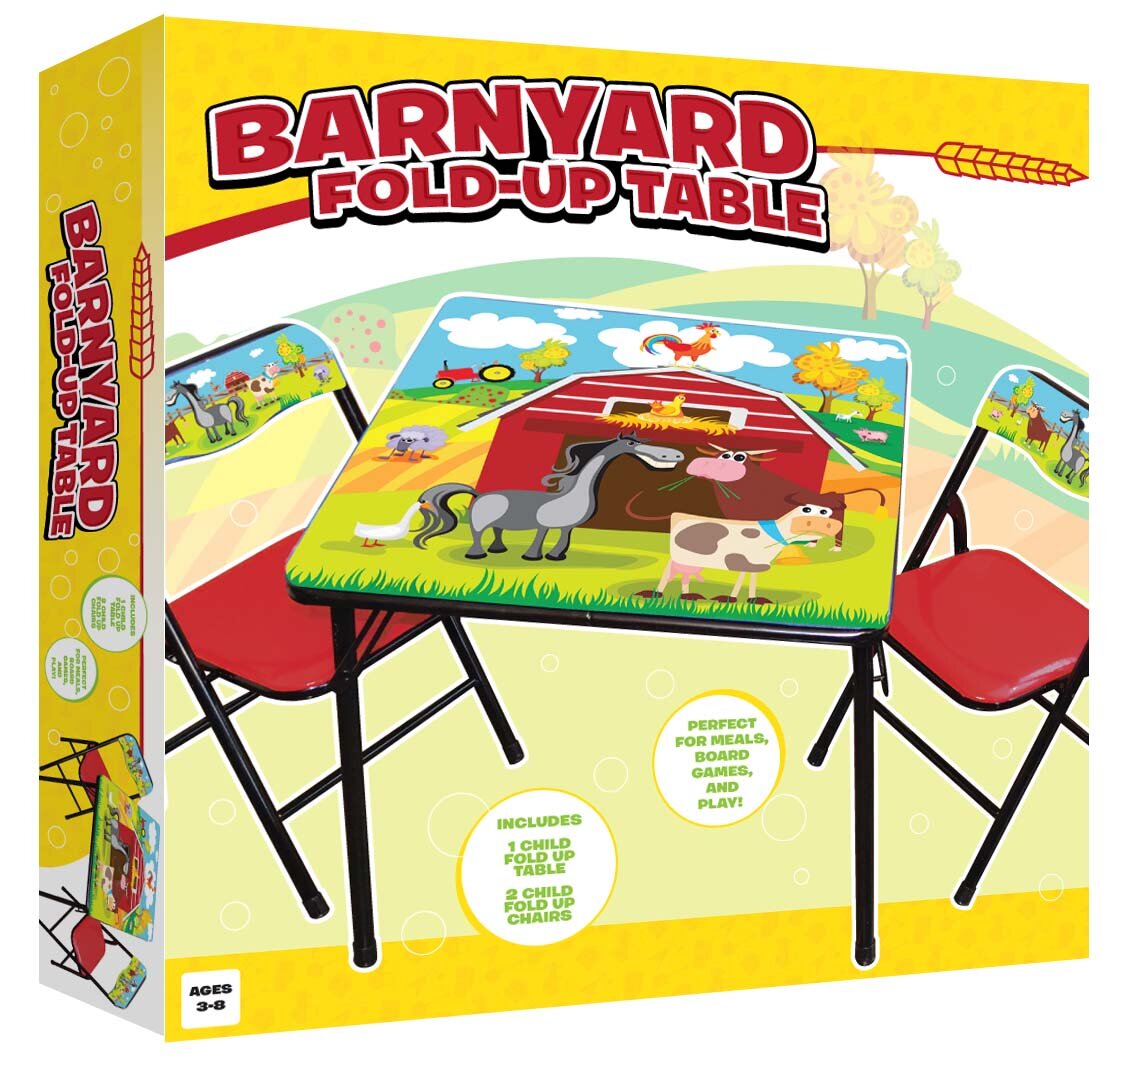 kids foldable table and chair set